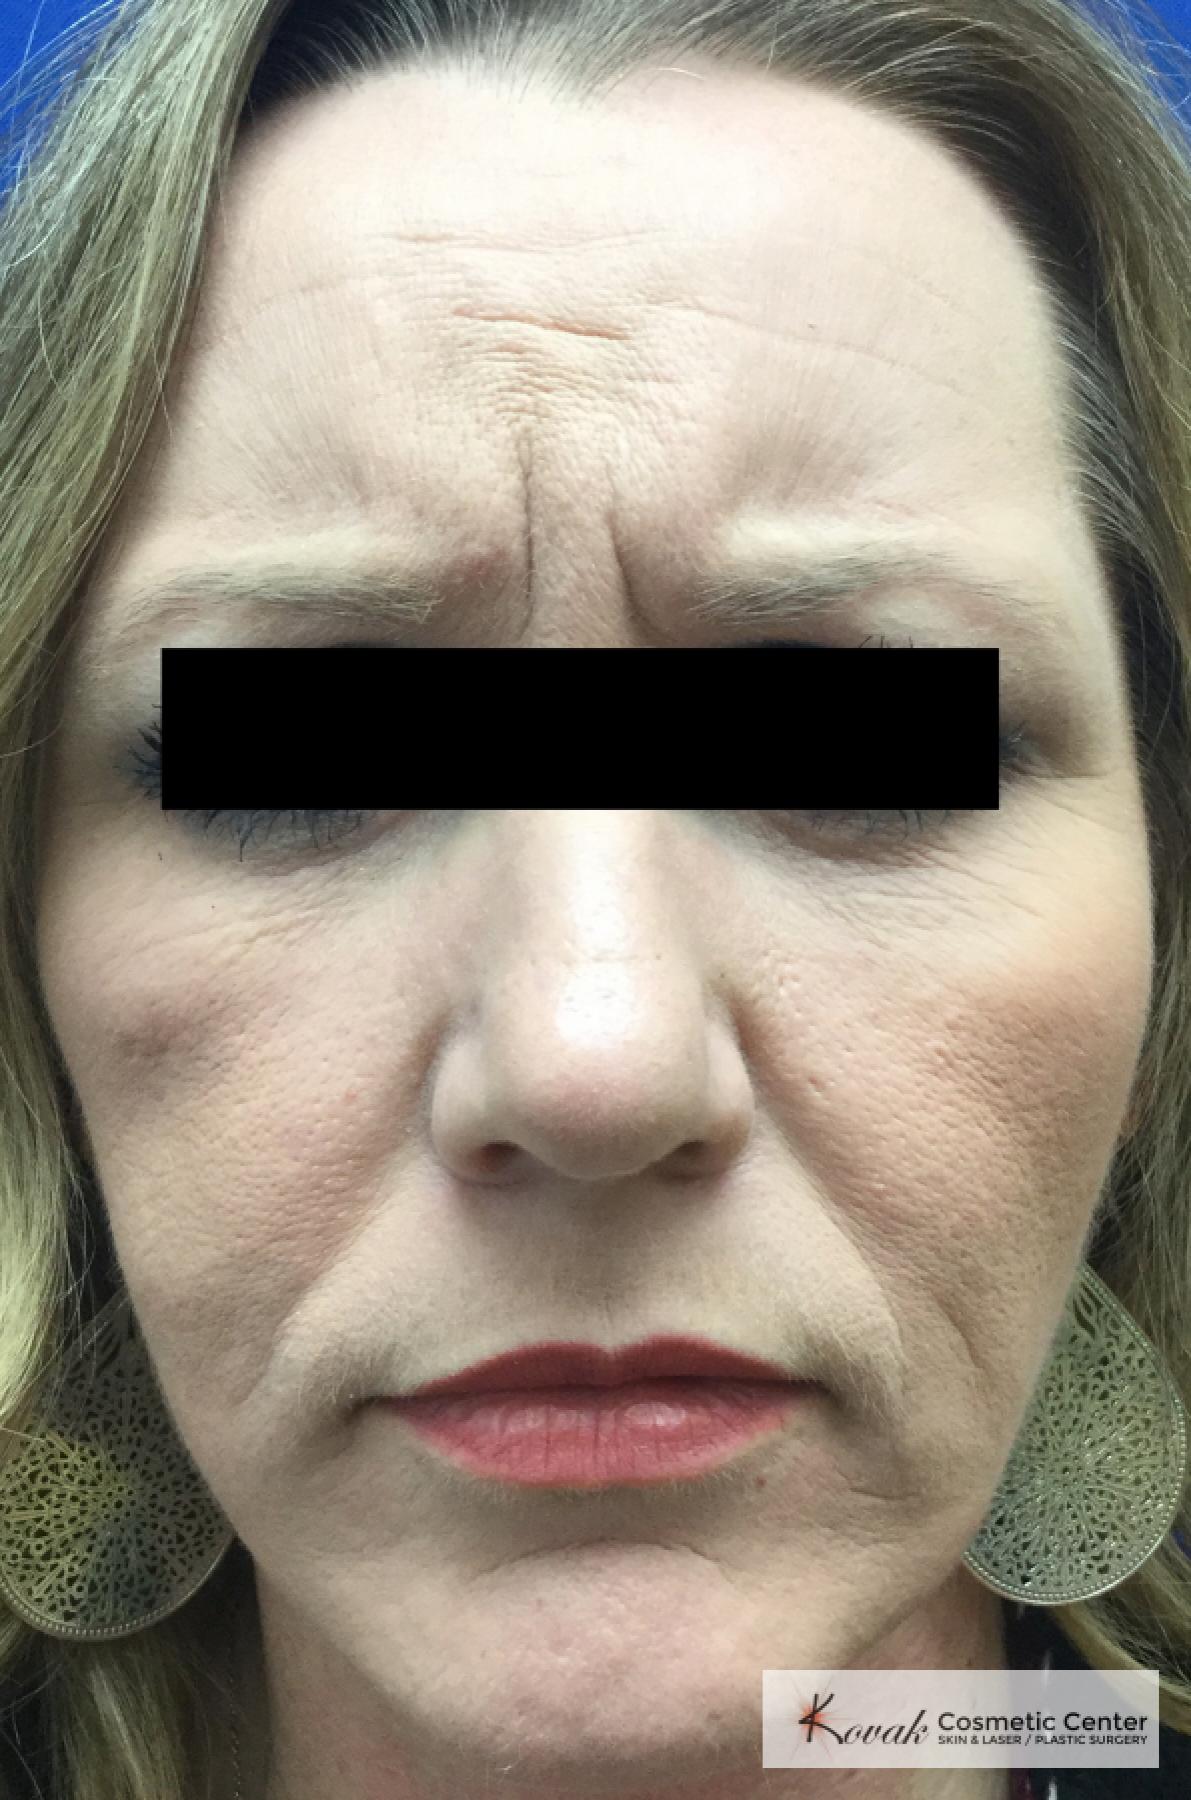 BOTOX® Cosmetic: Patient 6 - Before and After 2